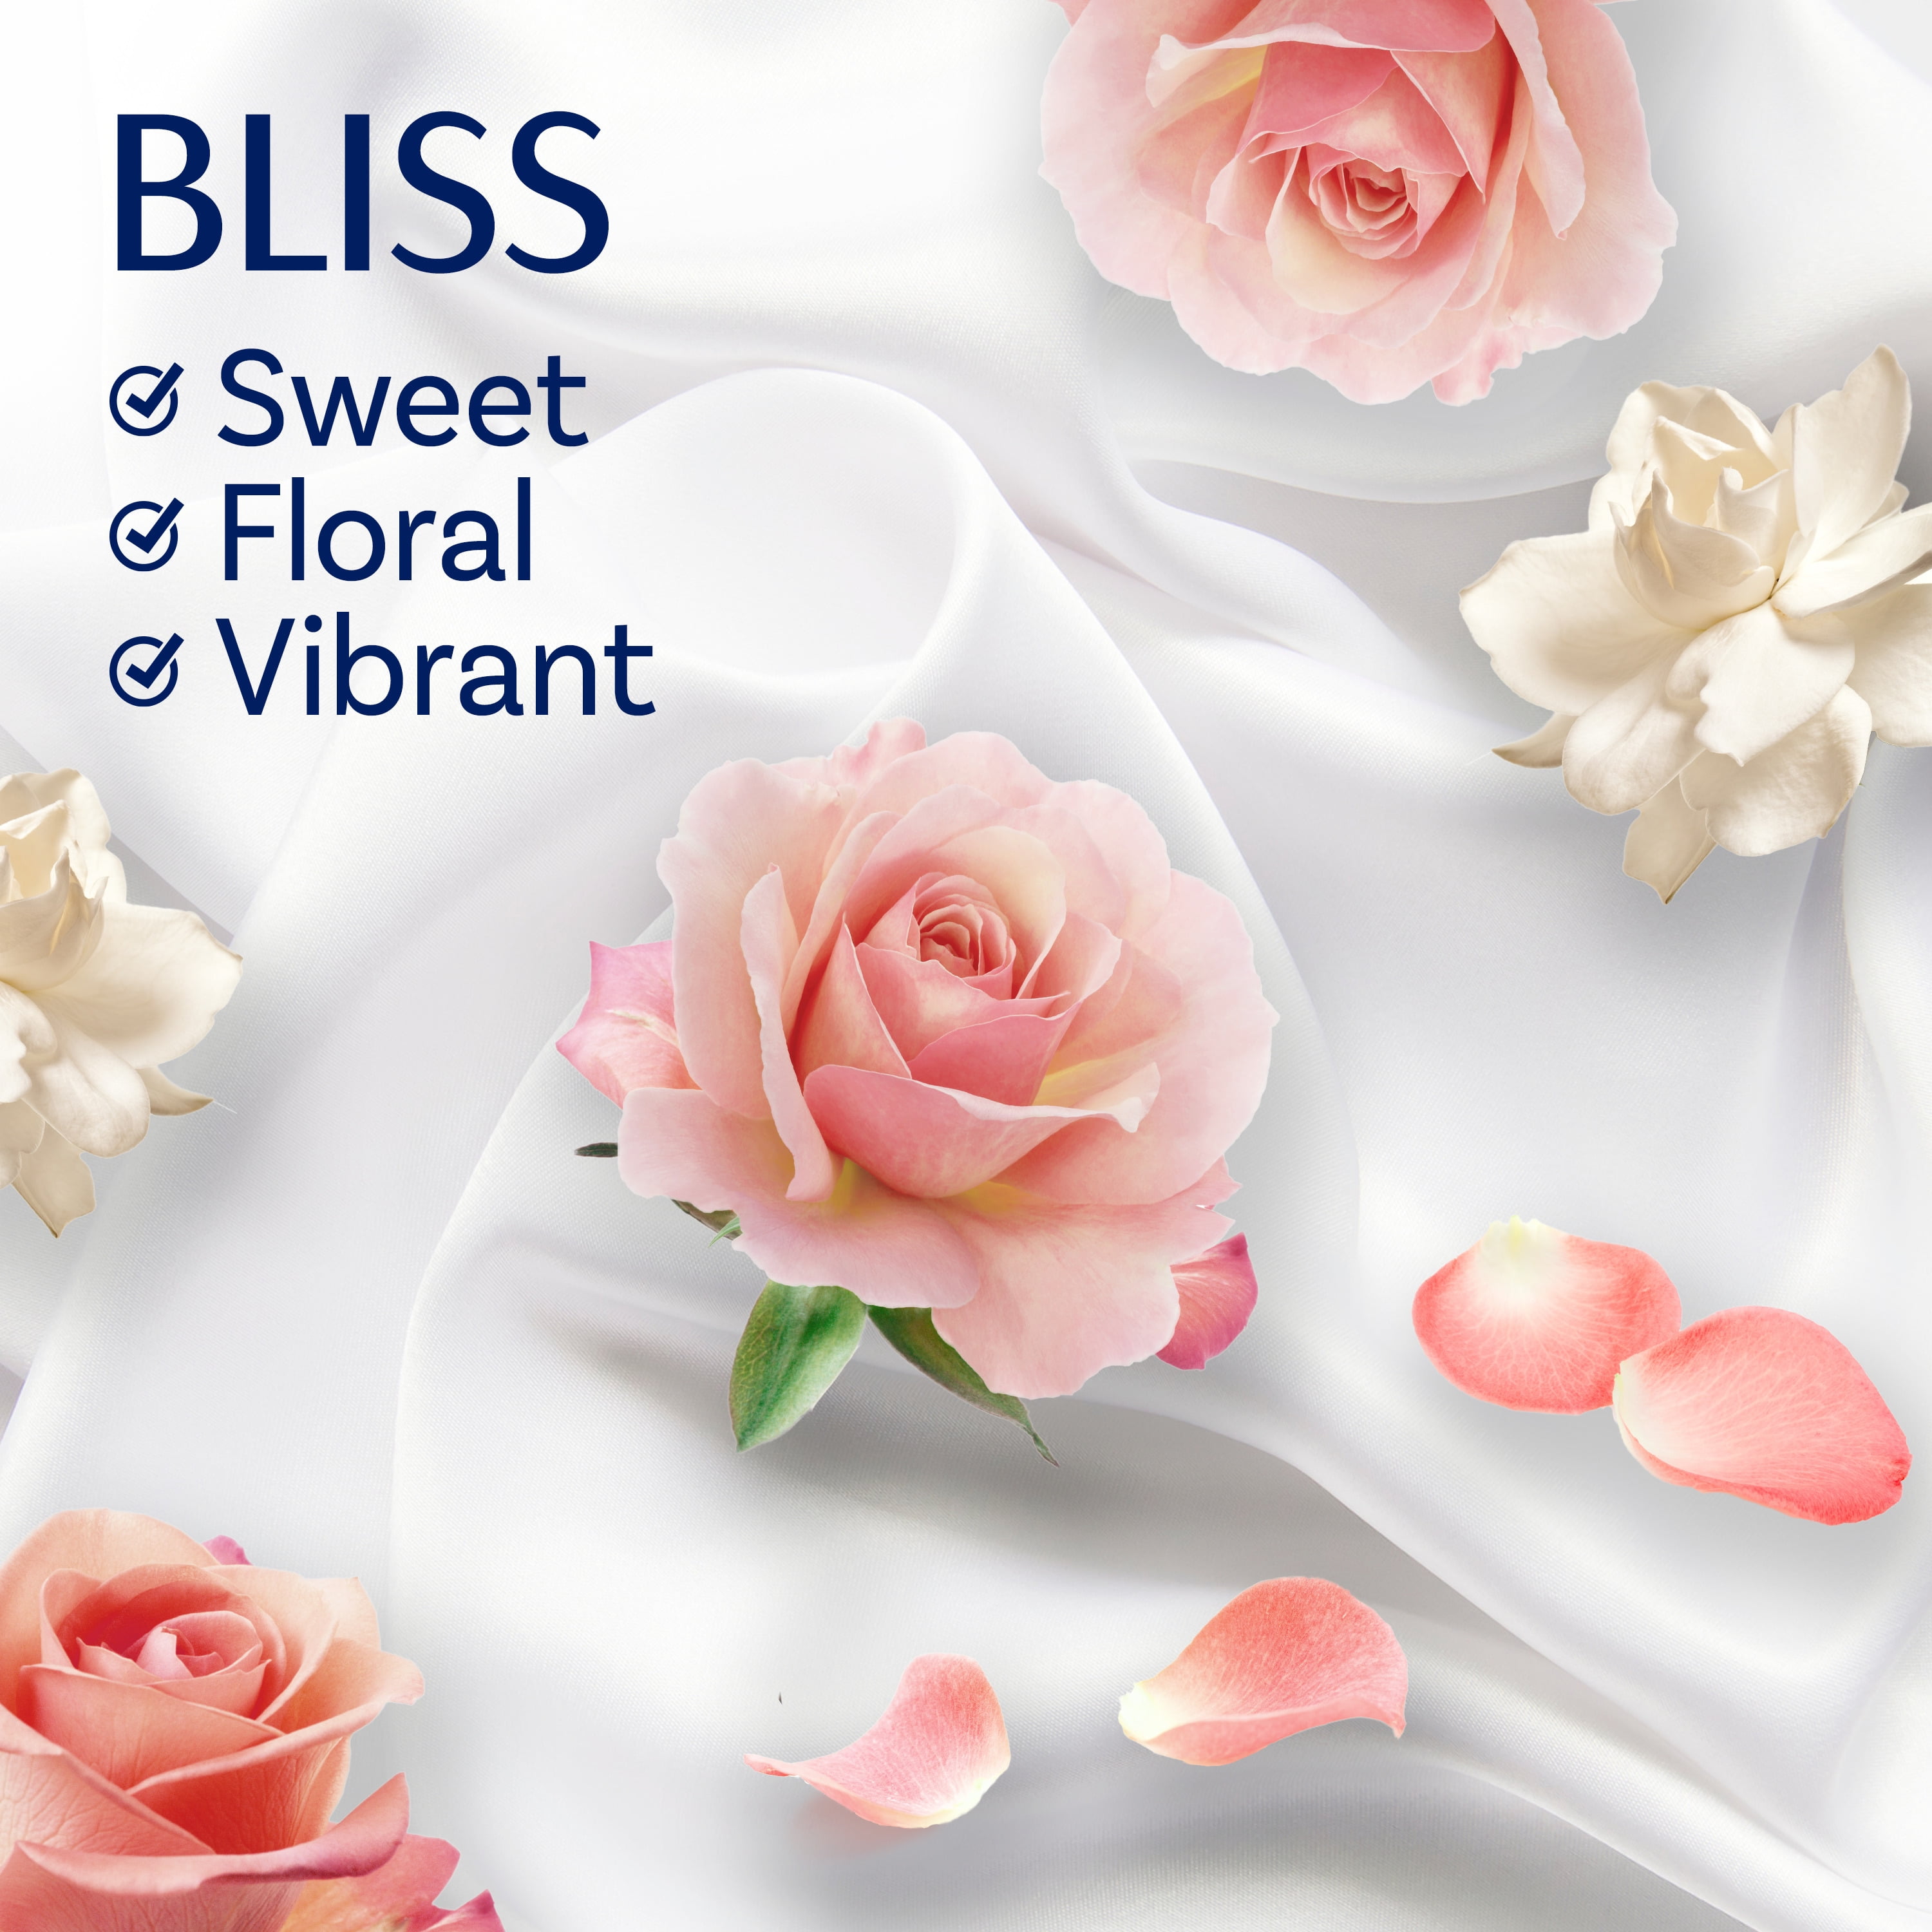 Downy Infusions Mega Dryer Sheets, BLISS, Amber and Rose, 80 Count 